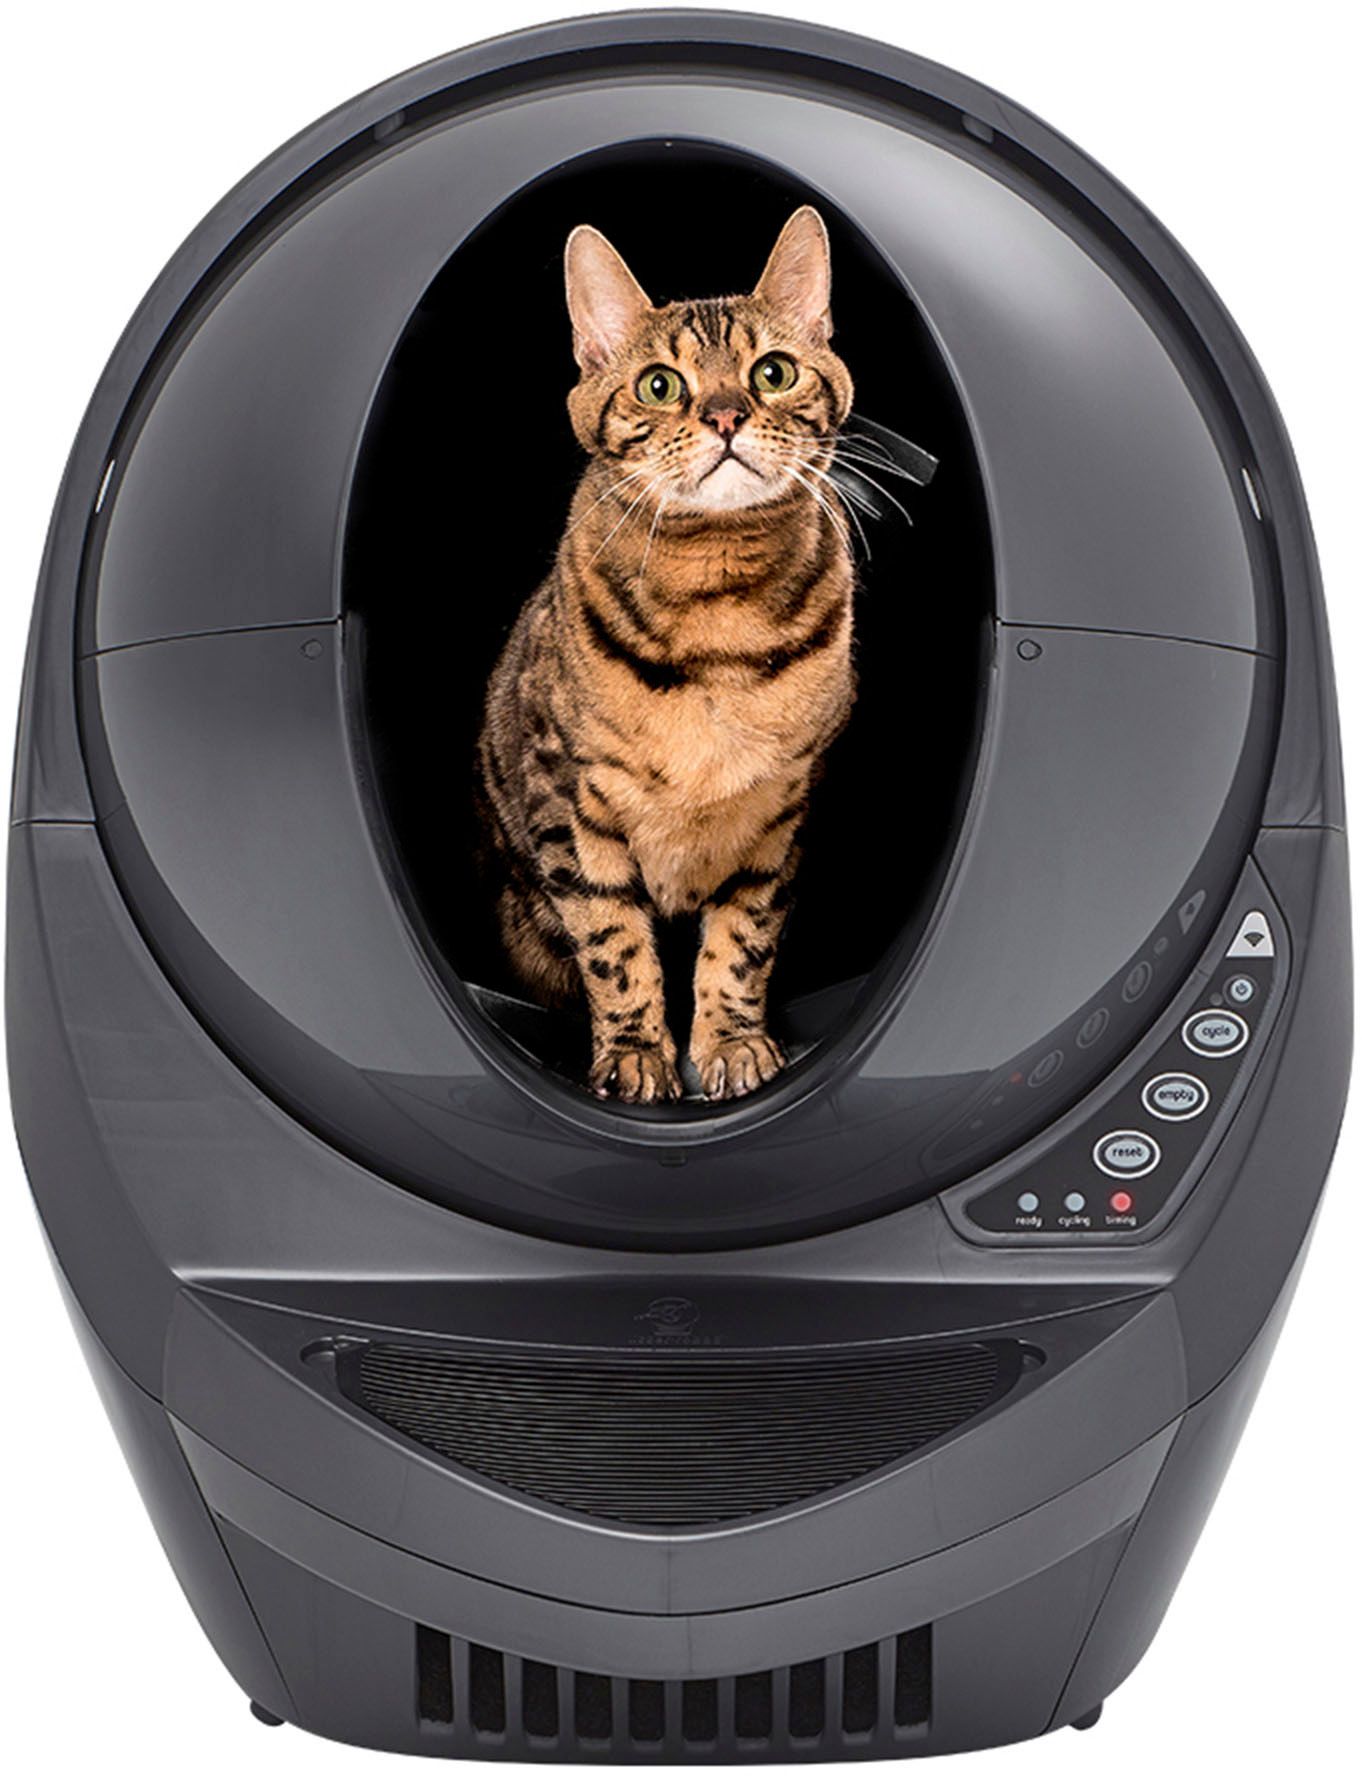 Whisker Litter-Robot 3 Connect Wi-Fi-Enabled Covered Automatic Self-Cleaning Cat Litter Box Grey ... | Best Buy U.S.